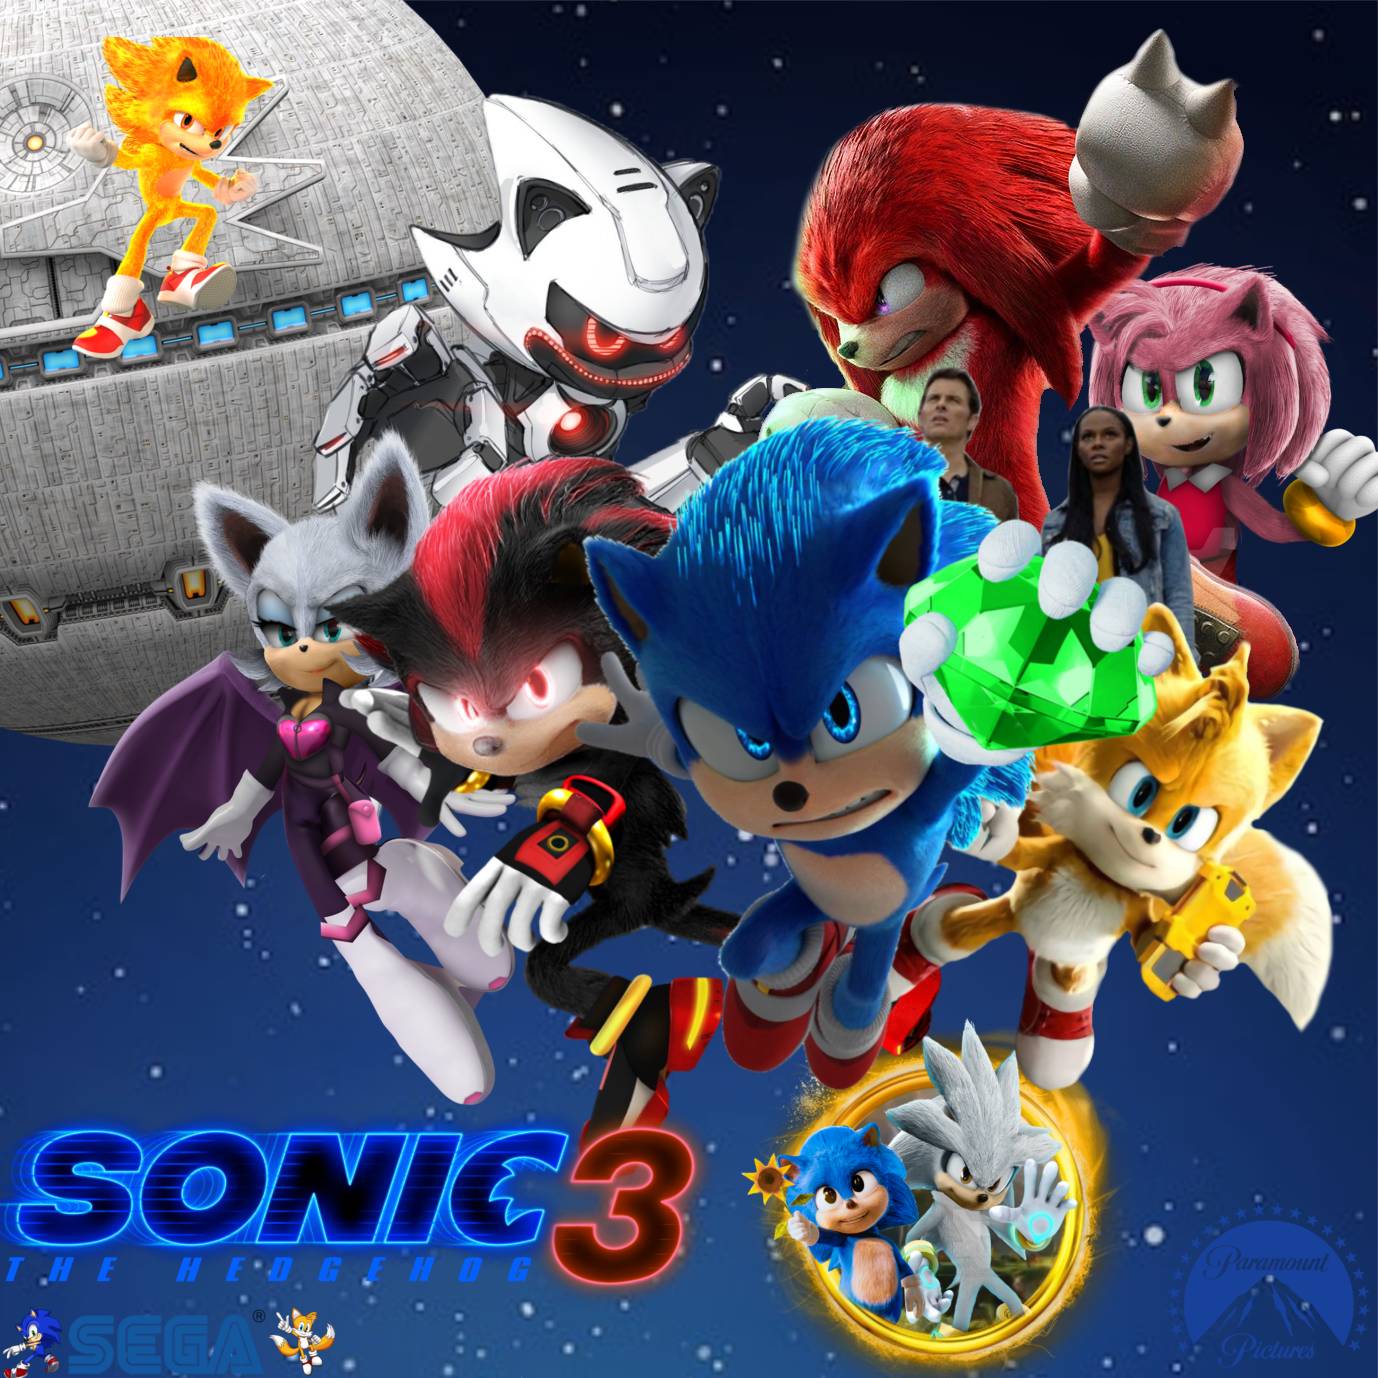 Sonic movie 3 fanmade japan poster and final V4 Sonic movie 3 US